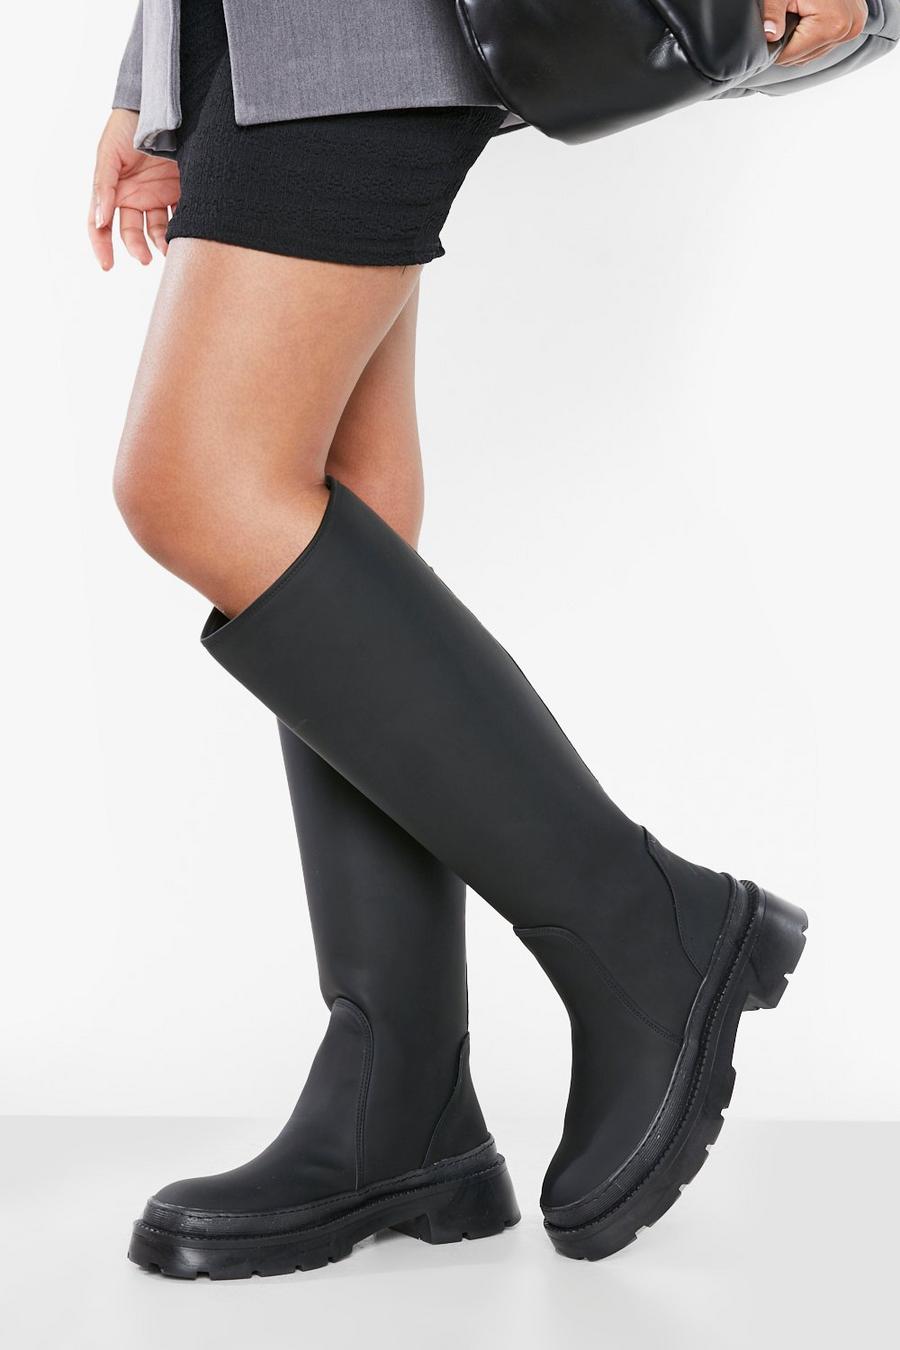 Black Knee High Rubber Boots